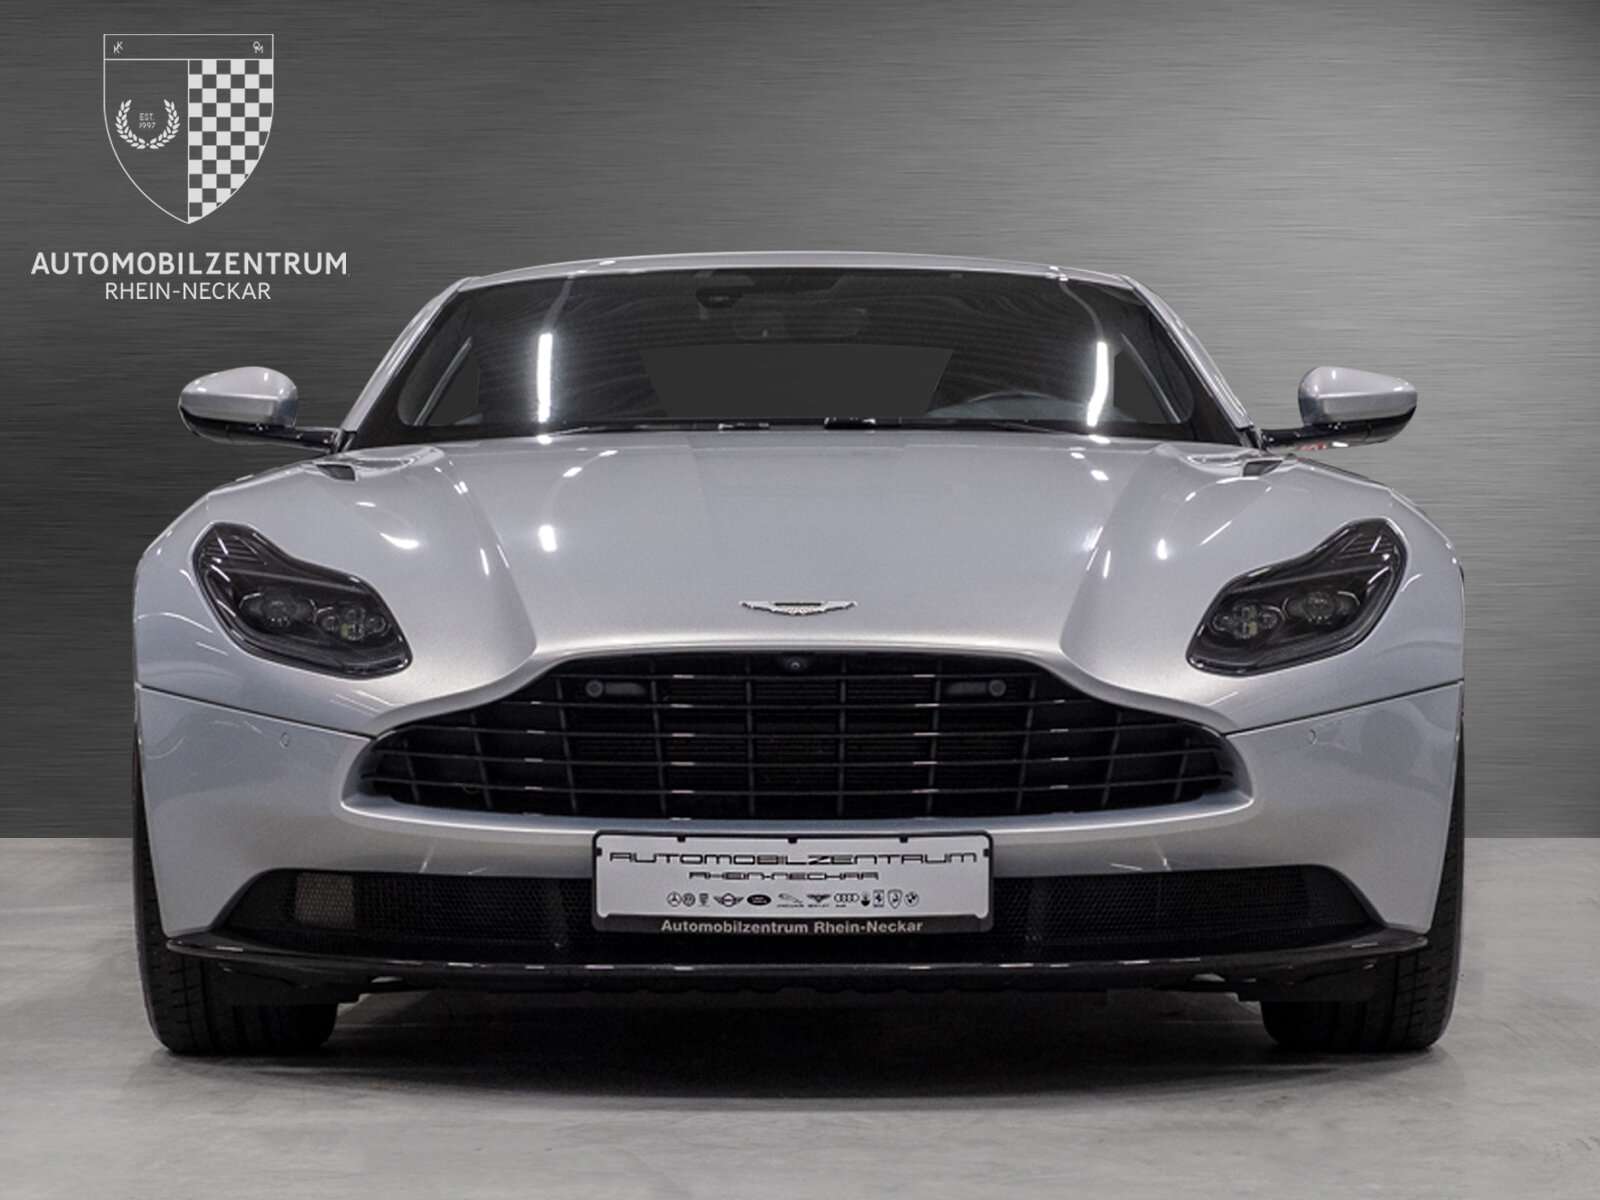 Aston Martin DB11 Coupe in Silver used in Viernheim for € 129,900.-